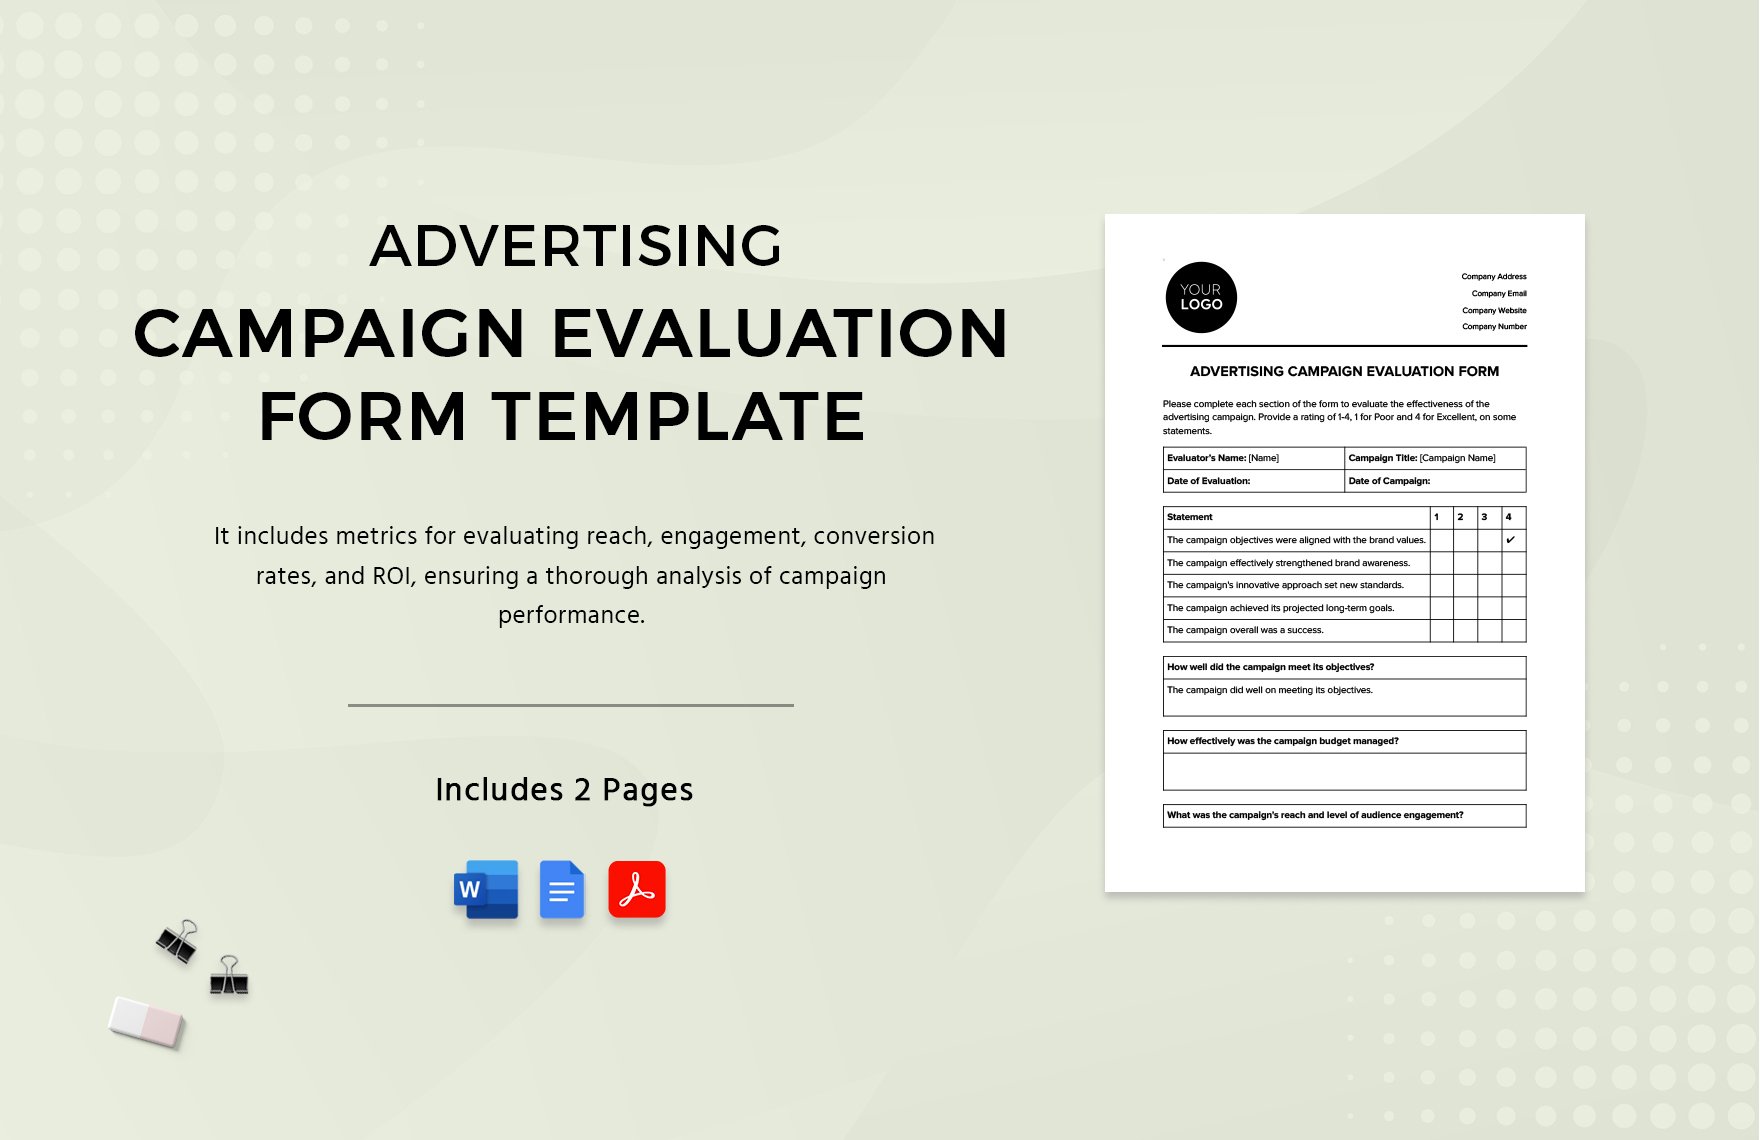 Advertising Campaign Evaluation Form Template in Word, Google Docs, PDF